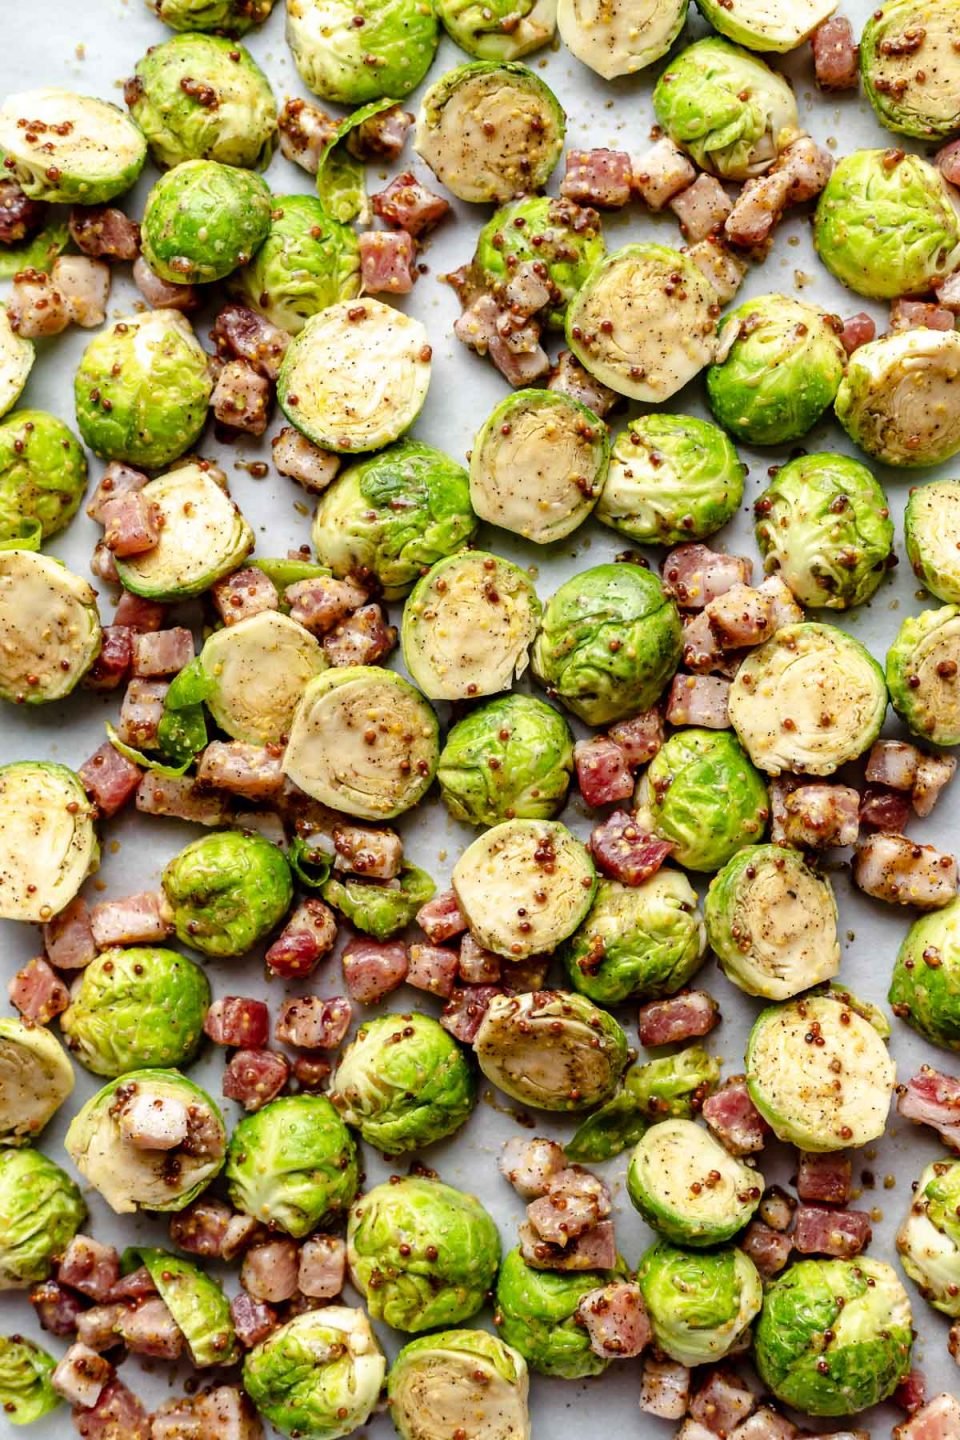 Brussels sprouts coated in Maple syrup & mustard, on a large baking sheet with dice pancetta.